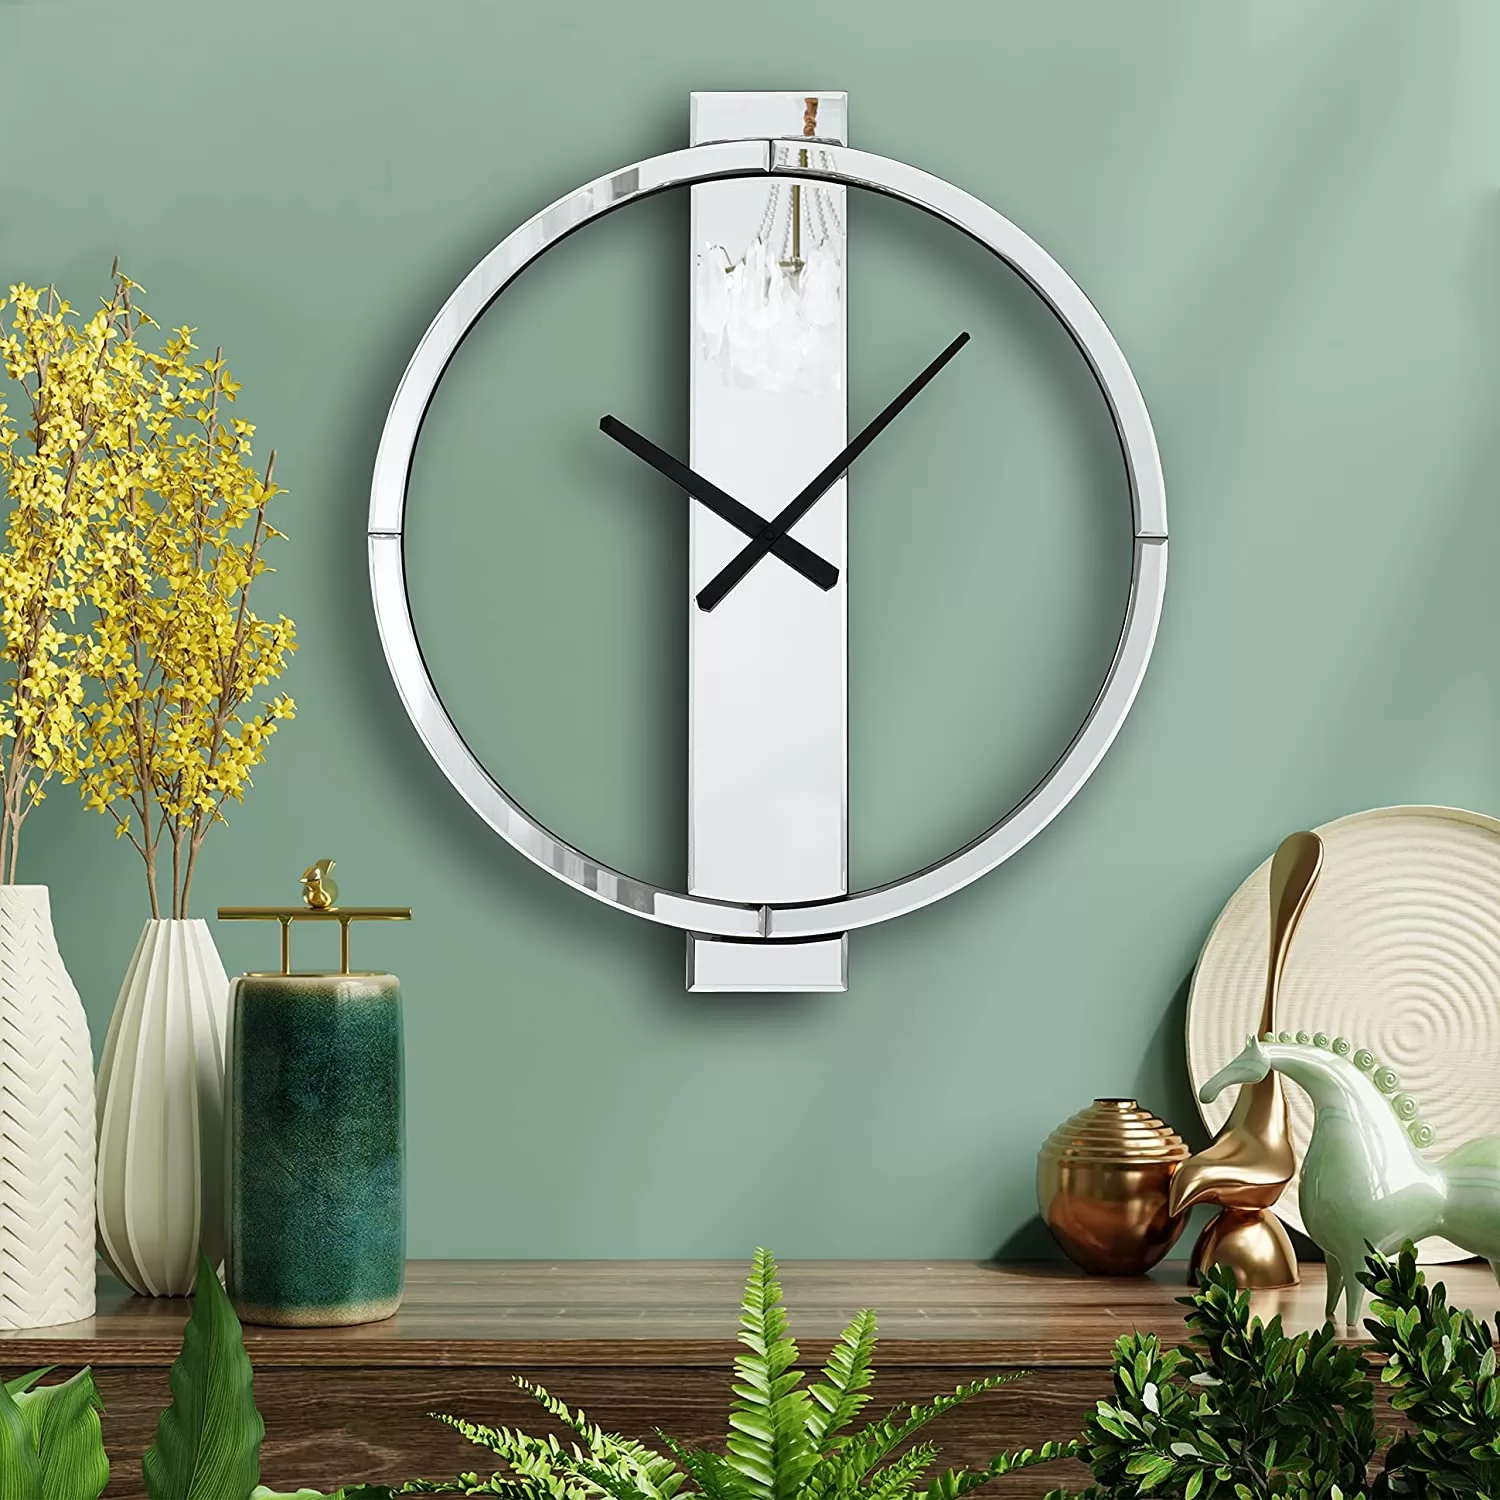 SHYFOY Wall Clock Decorative Large Clock Living Room Decor - 23" All Mirror Glass Finish Big Modern Clock for Wall Round Wall Decor for Office Bedroom